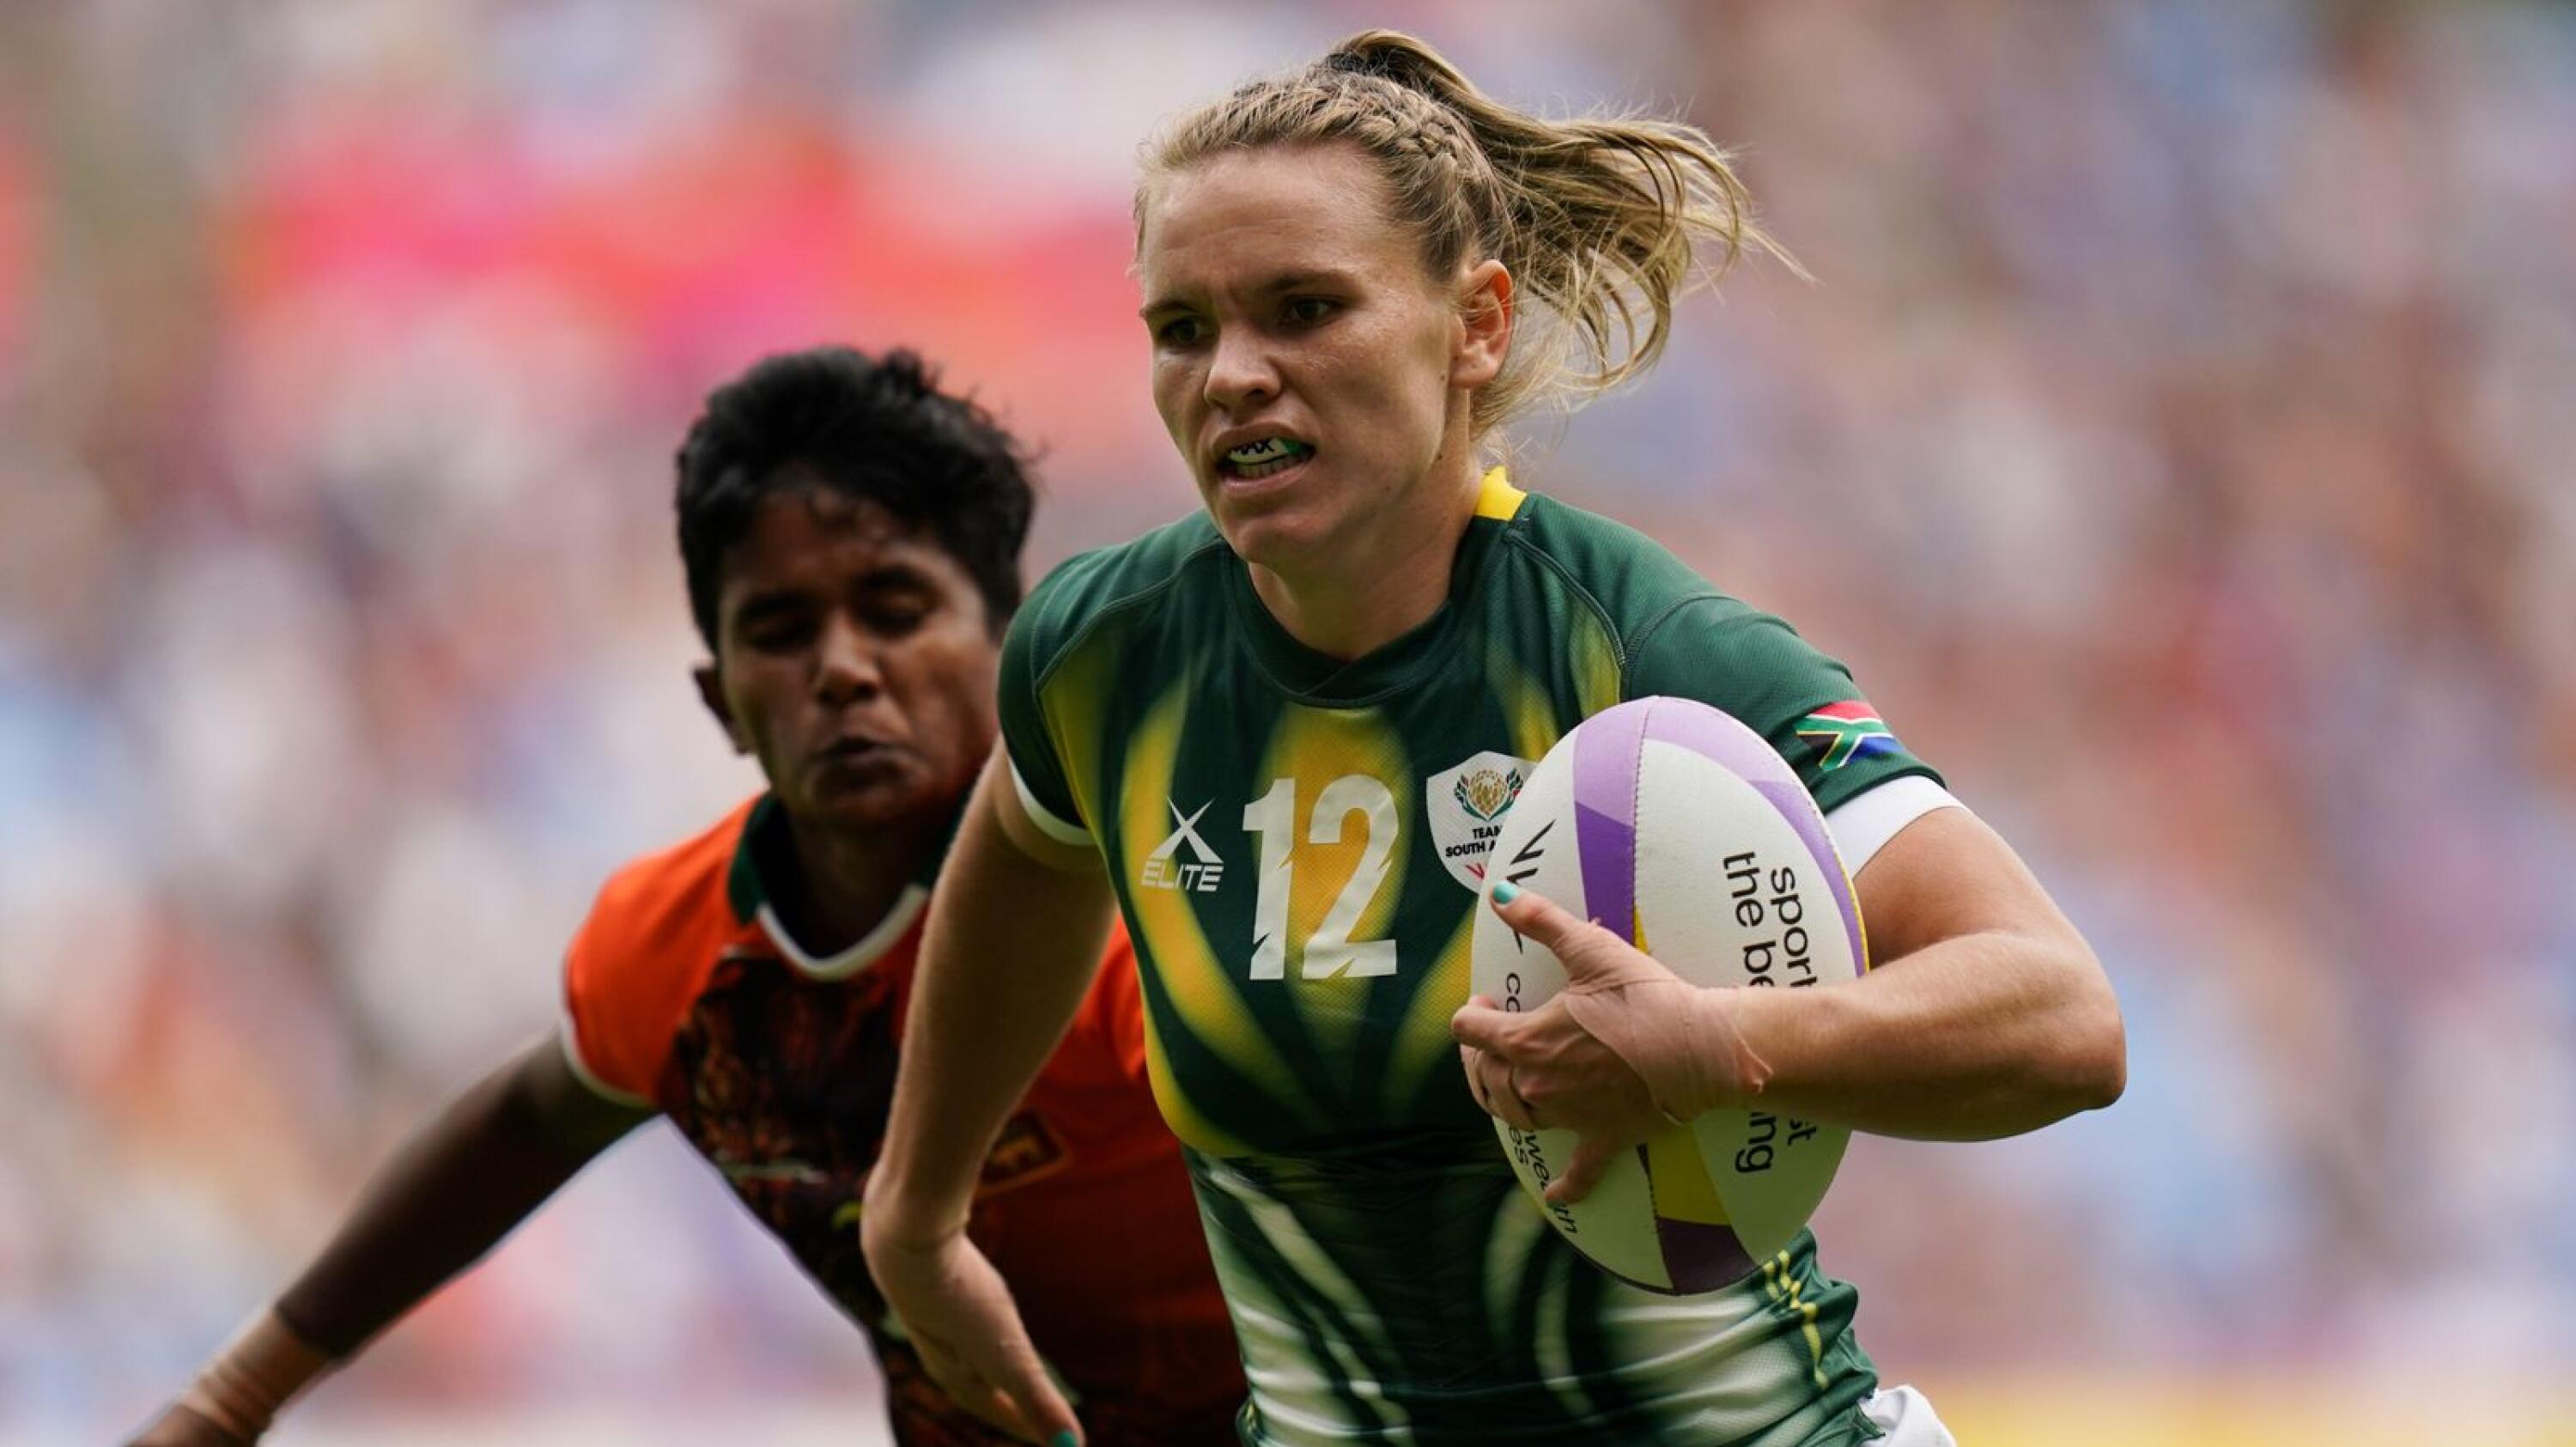 South Africa's Liske Lategan in action against Sri Lanka at the Commonwealth Games last month. Picture: Jacob King BackpagePix